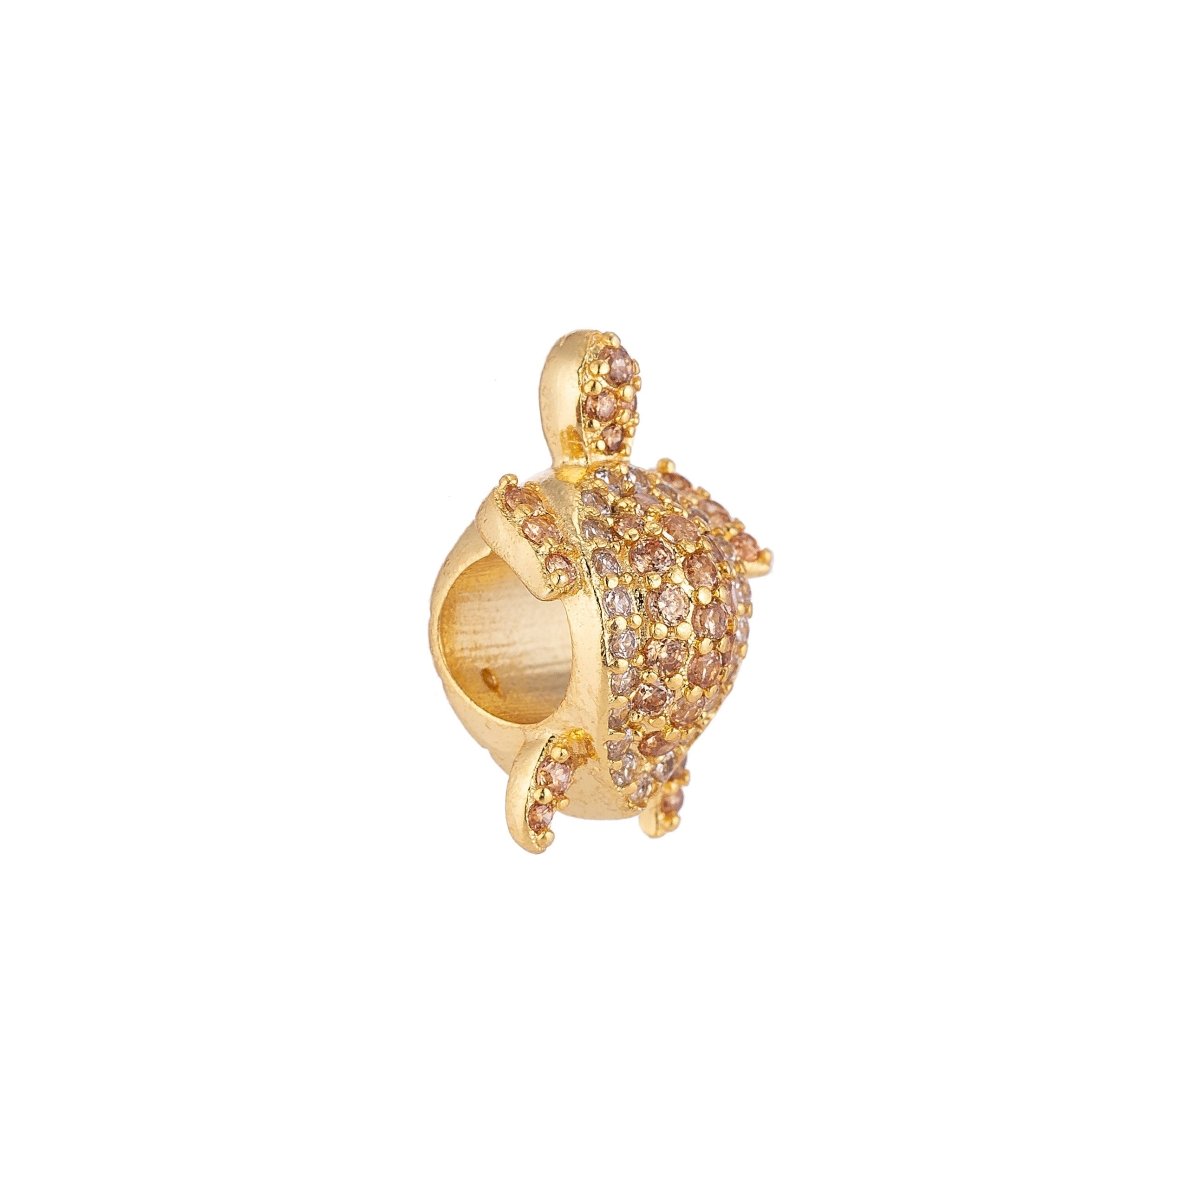 On Sale! CLEARANCE! 10mm Micro Paved Beach Turtle Gold Filled Spacer Bead | B-030 - DLUXCA